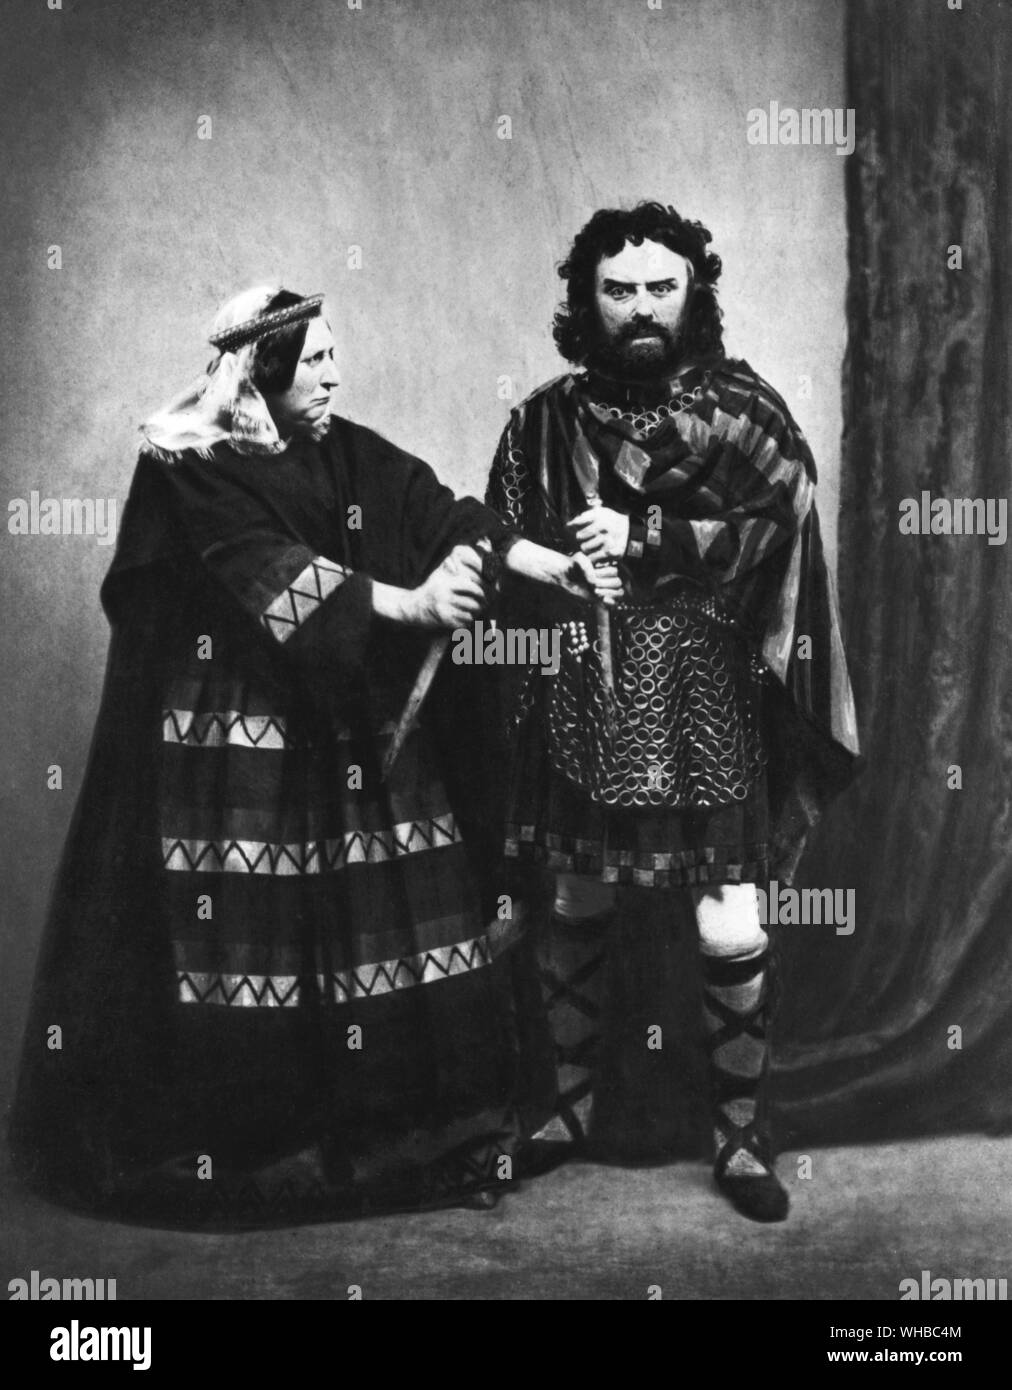 Mr and Mrs Charles Kean as Macbeth and Lady Macbeth in costumes aiming to be historically accurate  1858 Princess's Theatre Stock Photo